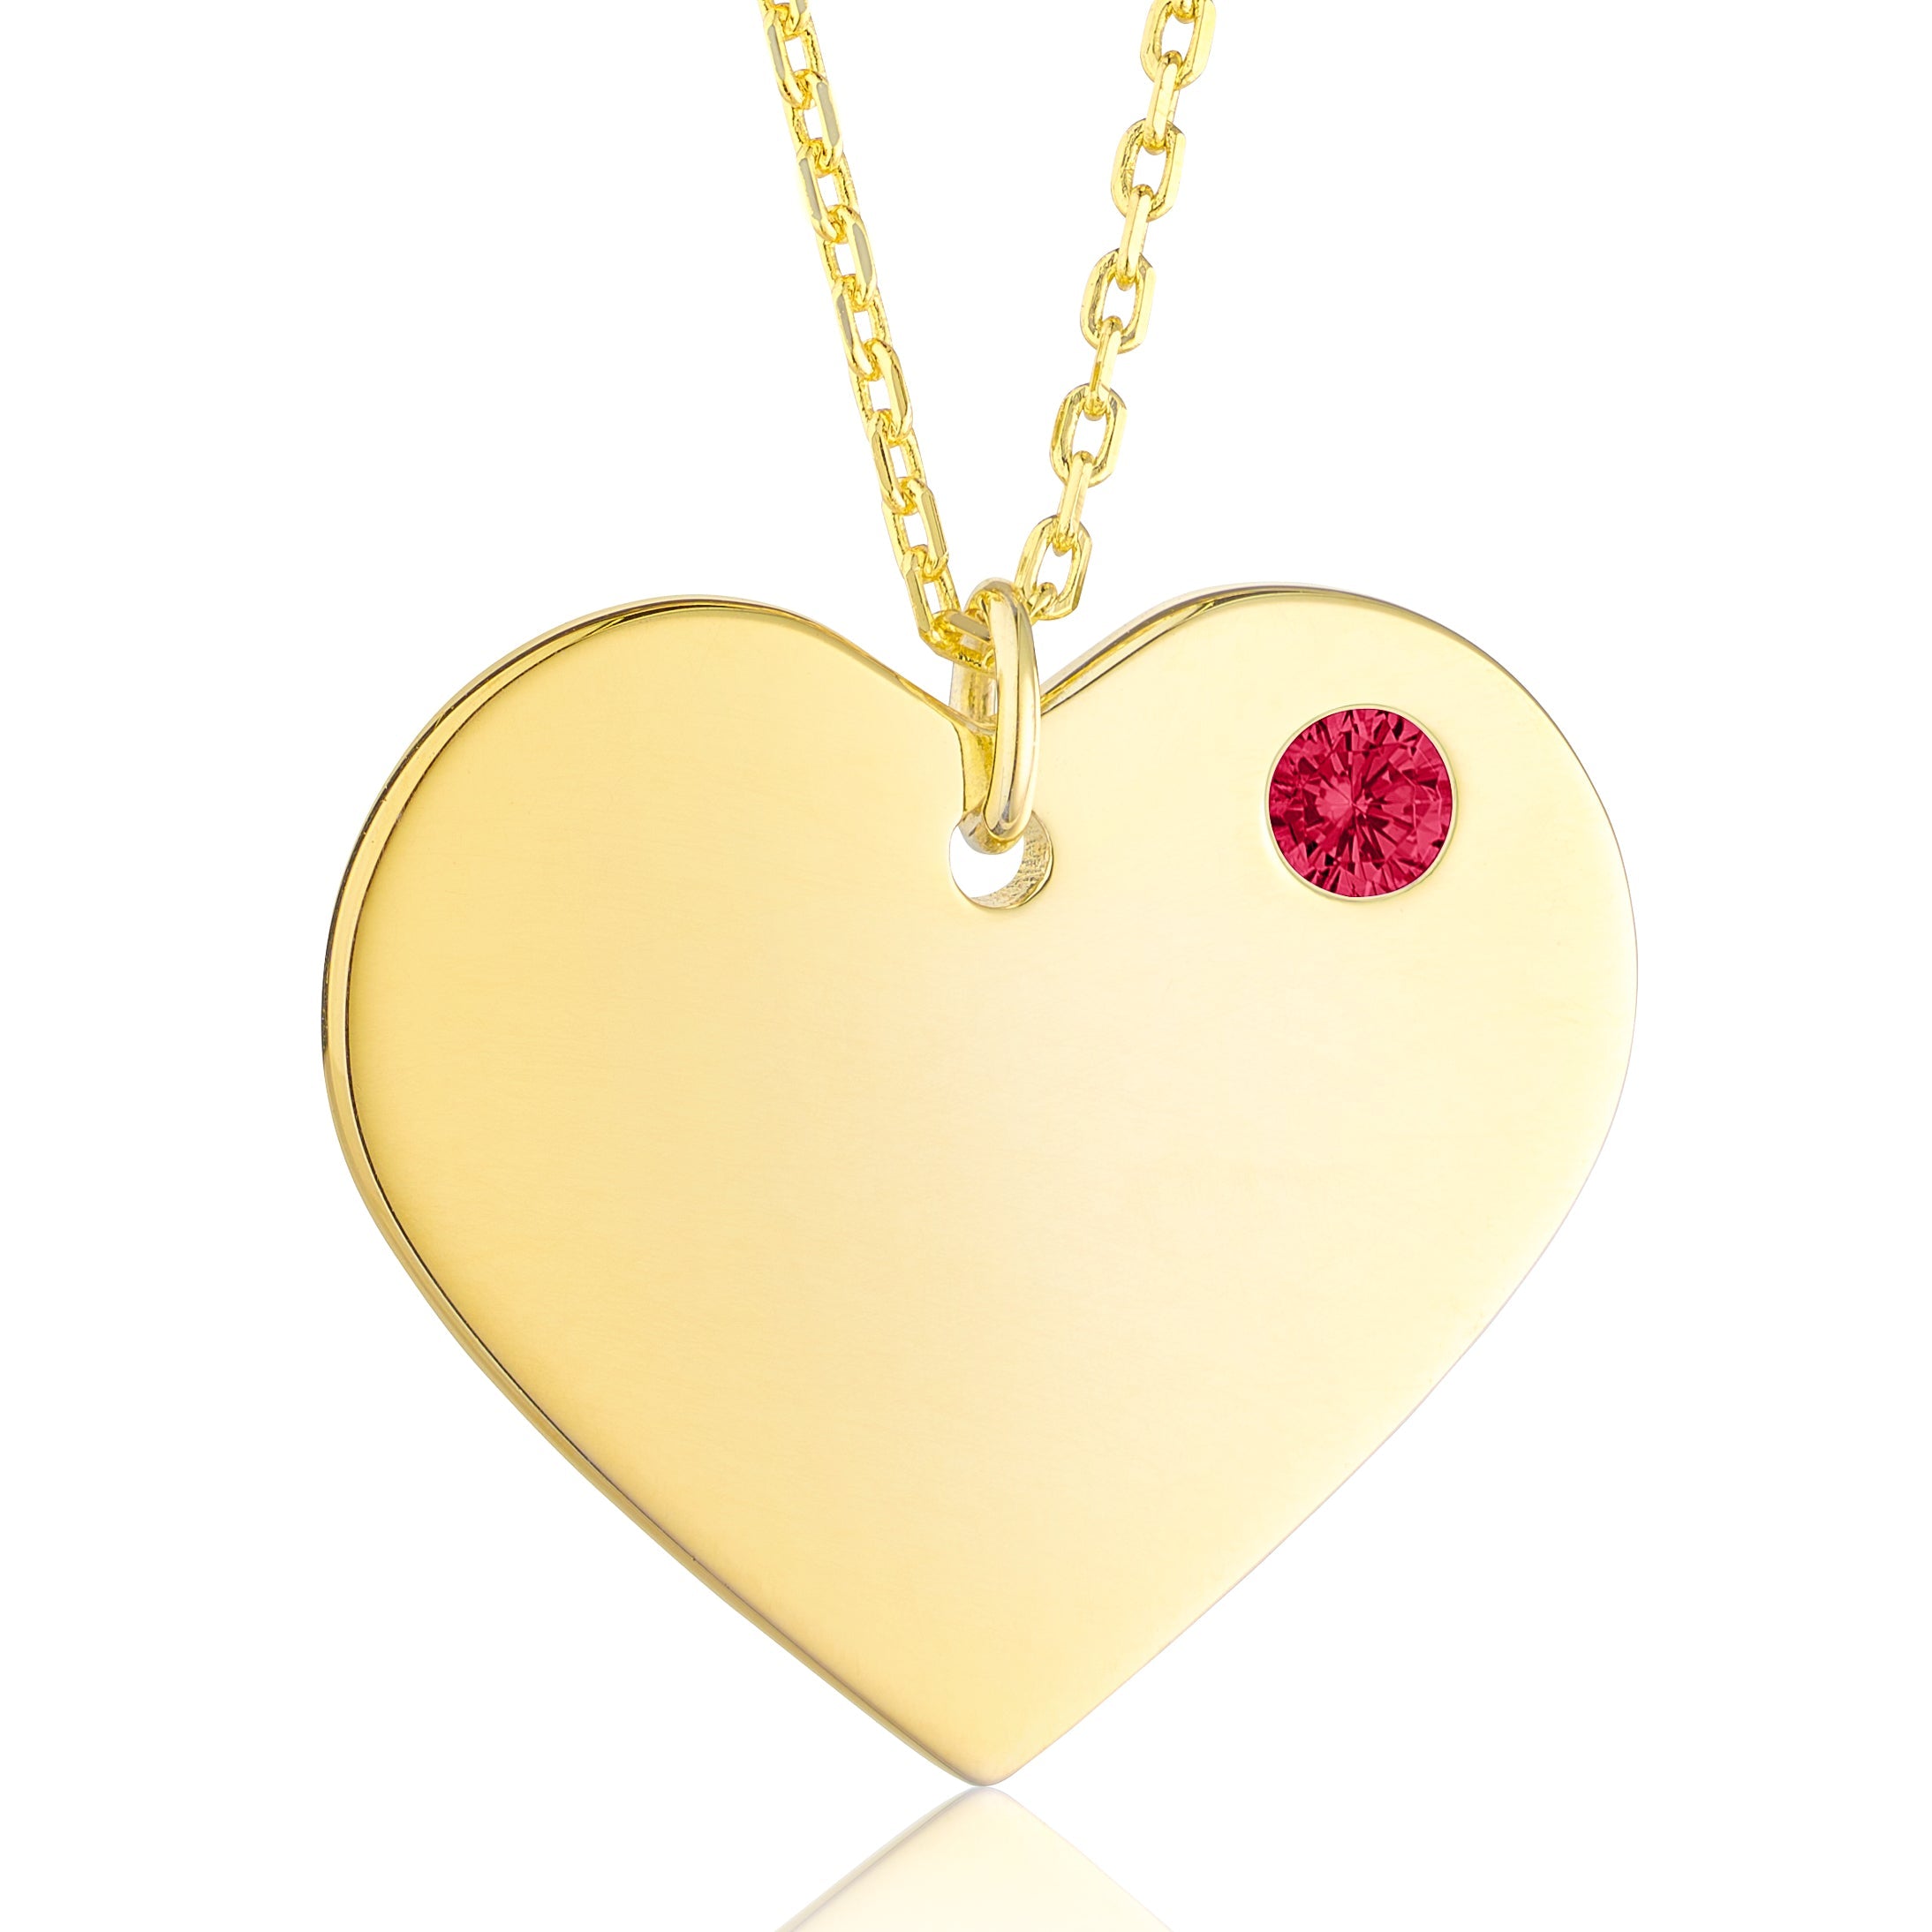 Engravable Heart Charm, Gold plated